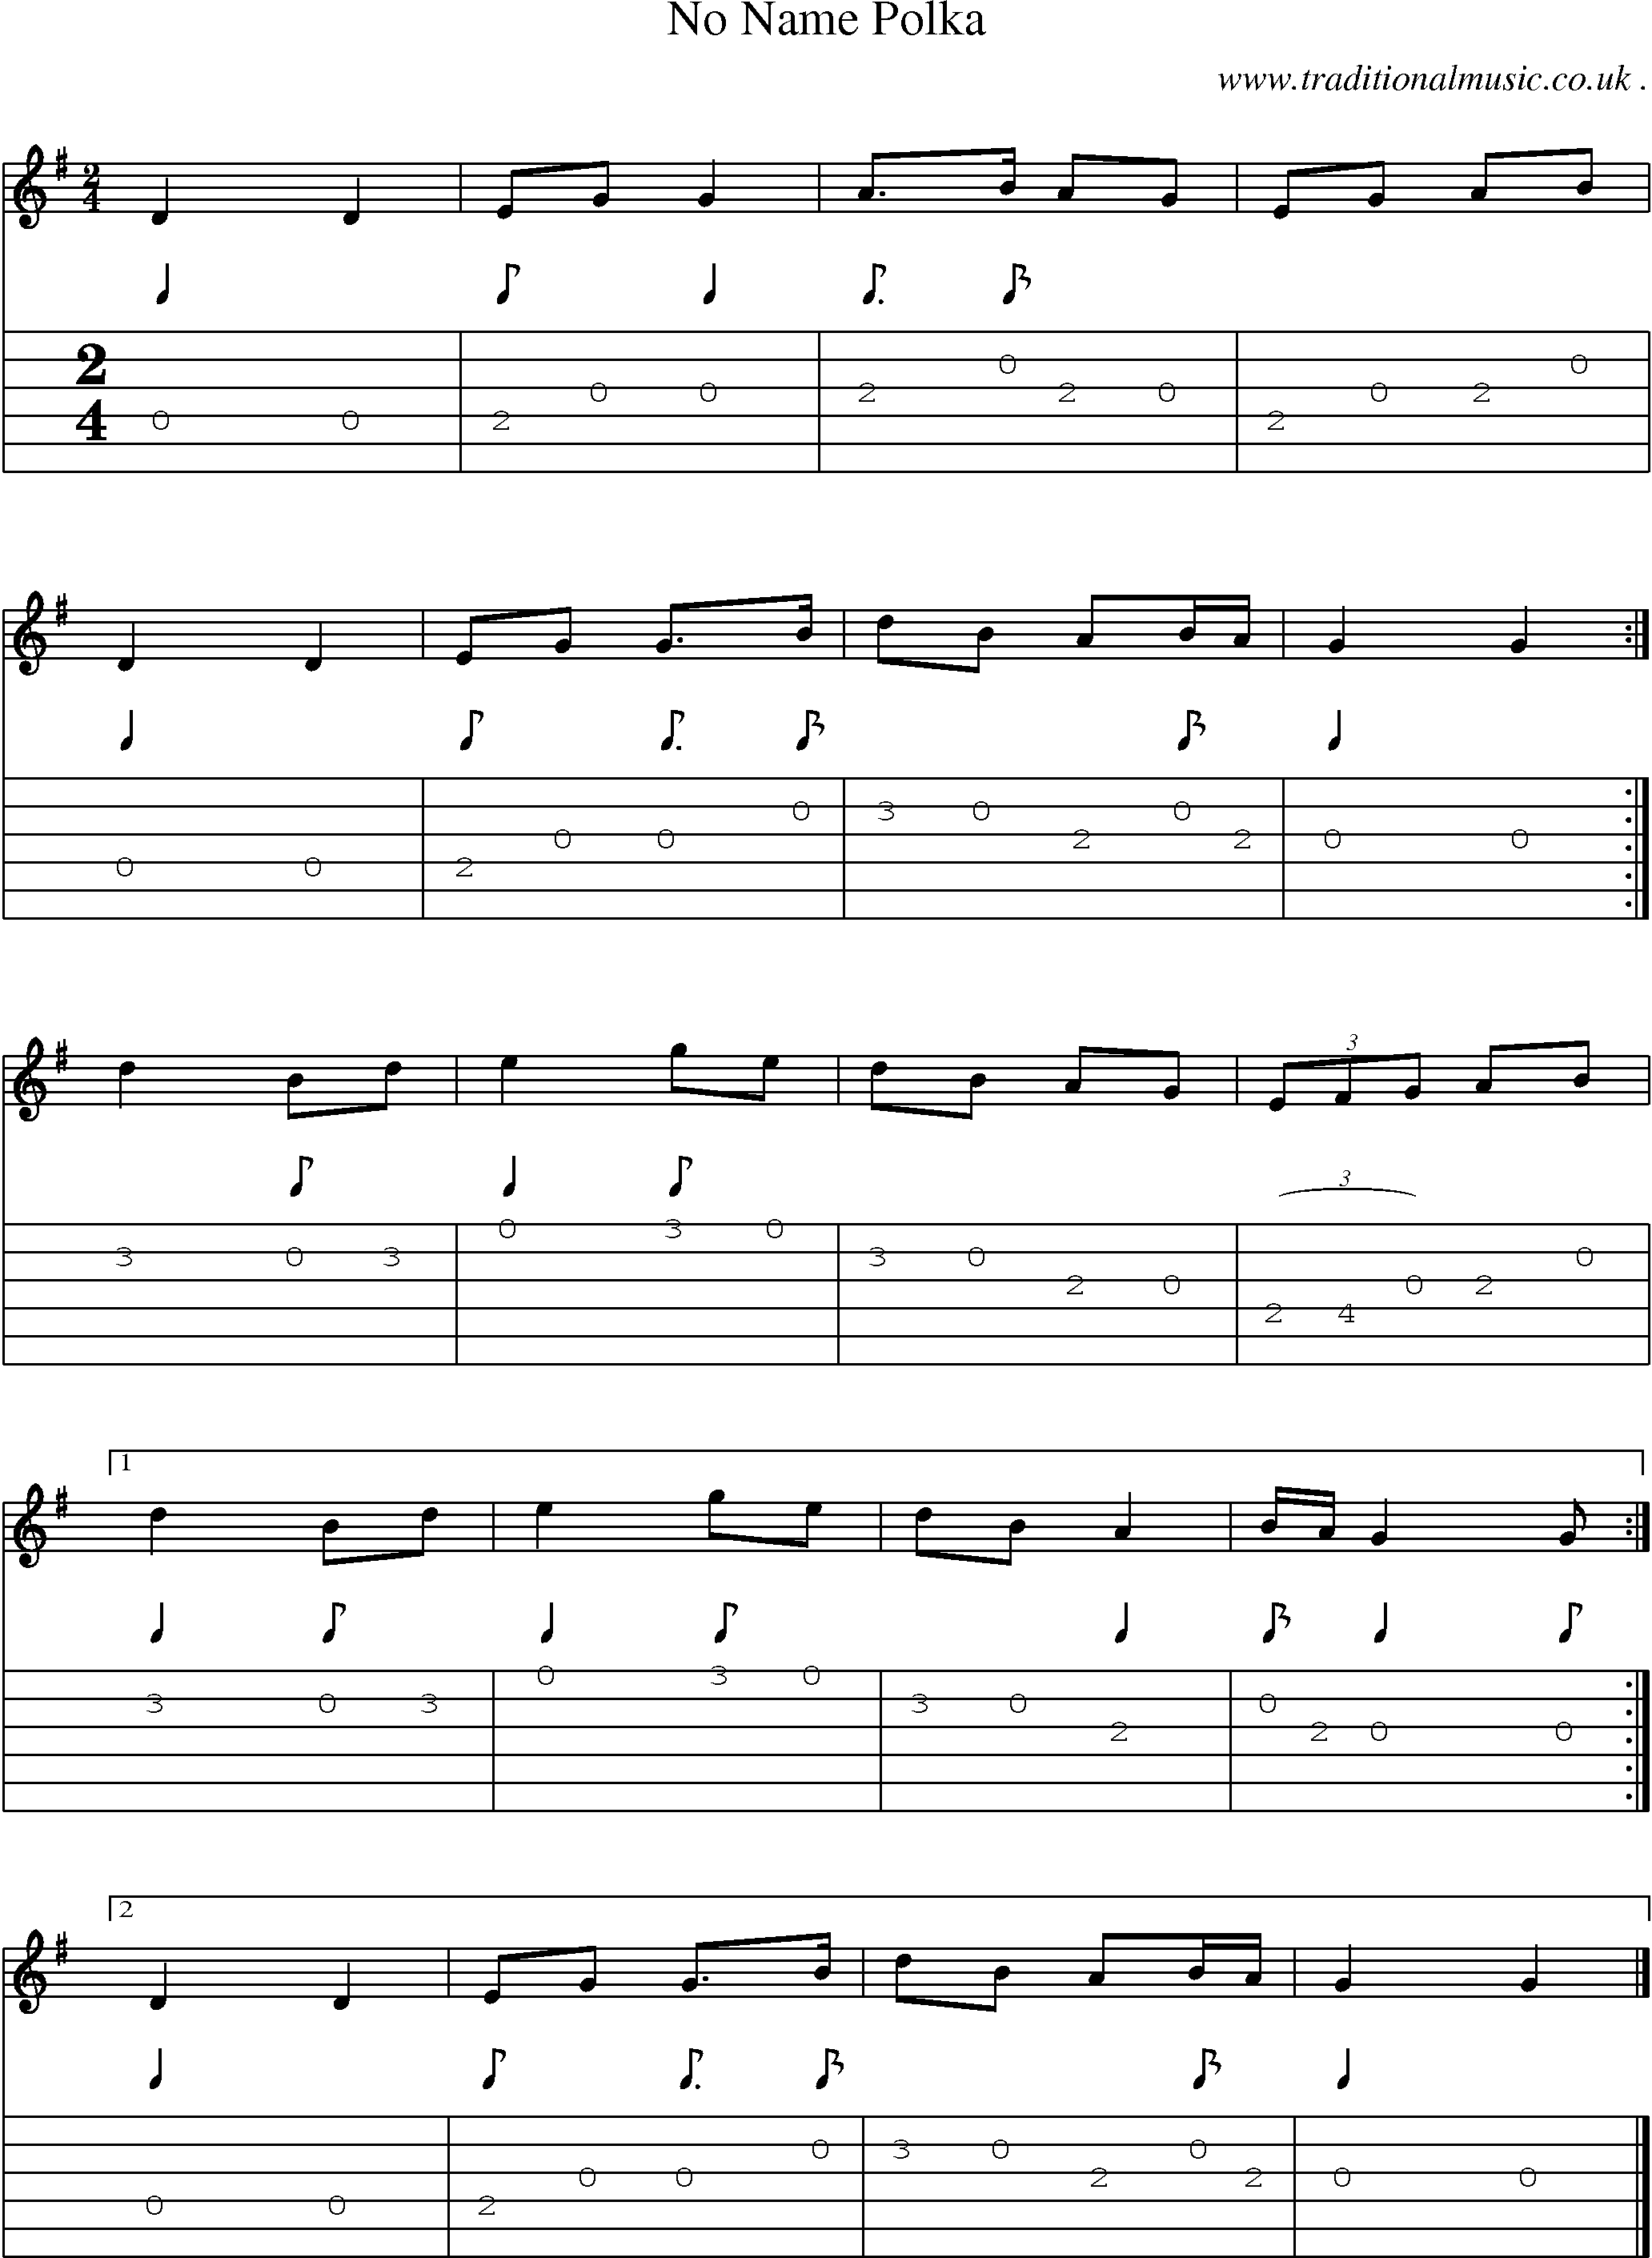 Sheet-music  score, Chords and Guitar Tabs for No Name Polka